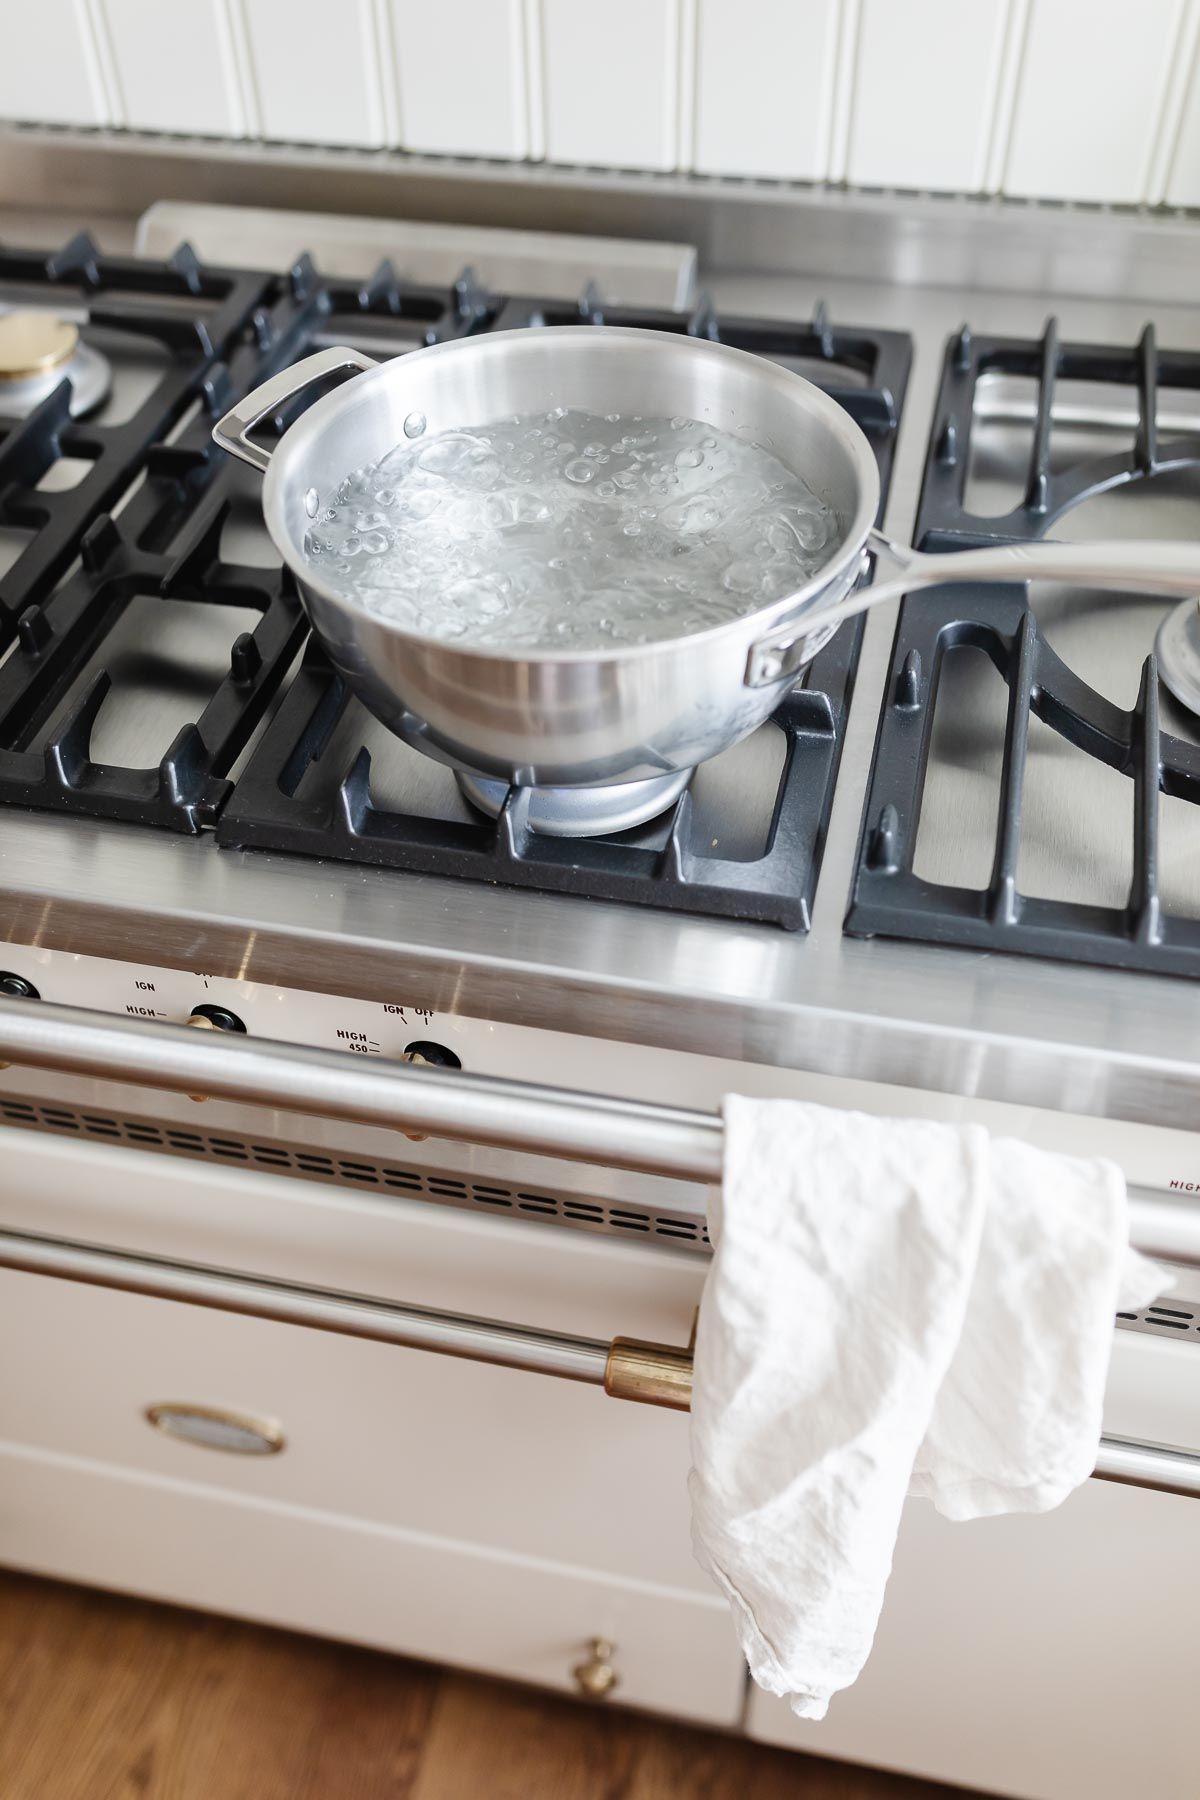 A pot of water boiling on a stove